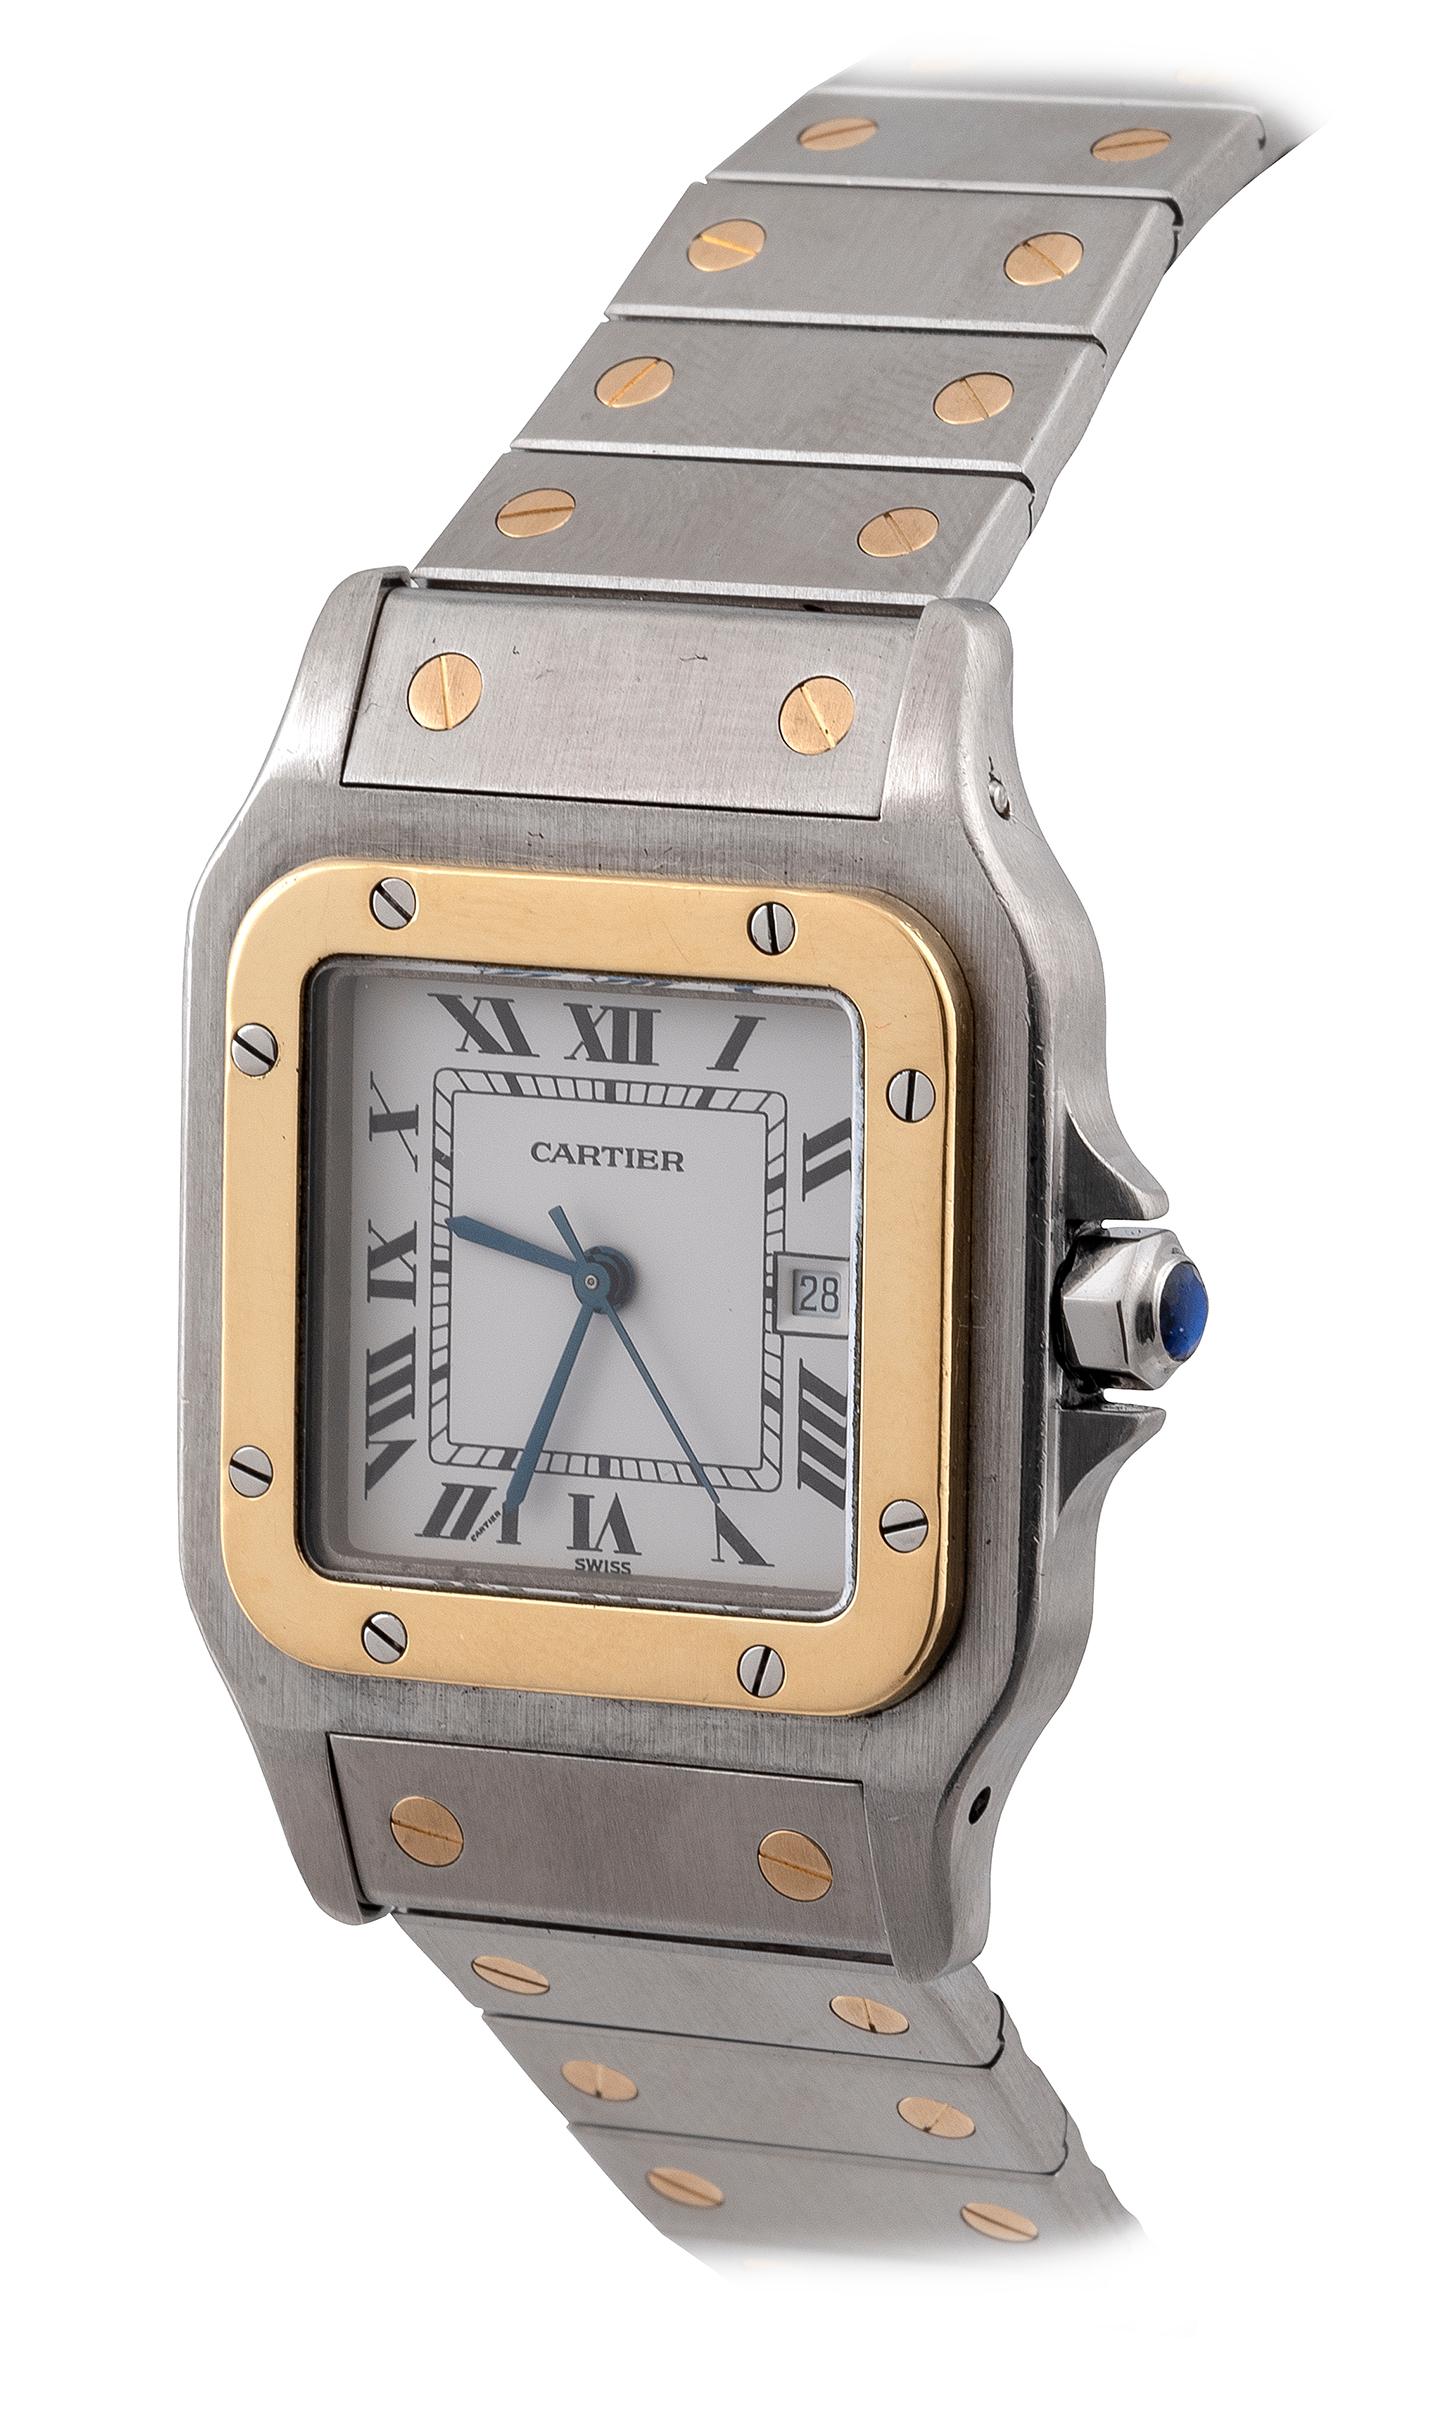 BERNARDO ANTICHITÀ PONTE VECCHIO FLORENCE

Fine, square, center seconds, self-winding, water-resistant, stainless steel and 18K yellow gold wristwatch with date and a stainless steel Cartier Santos bracelet with 18K yellow gold screws and steel